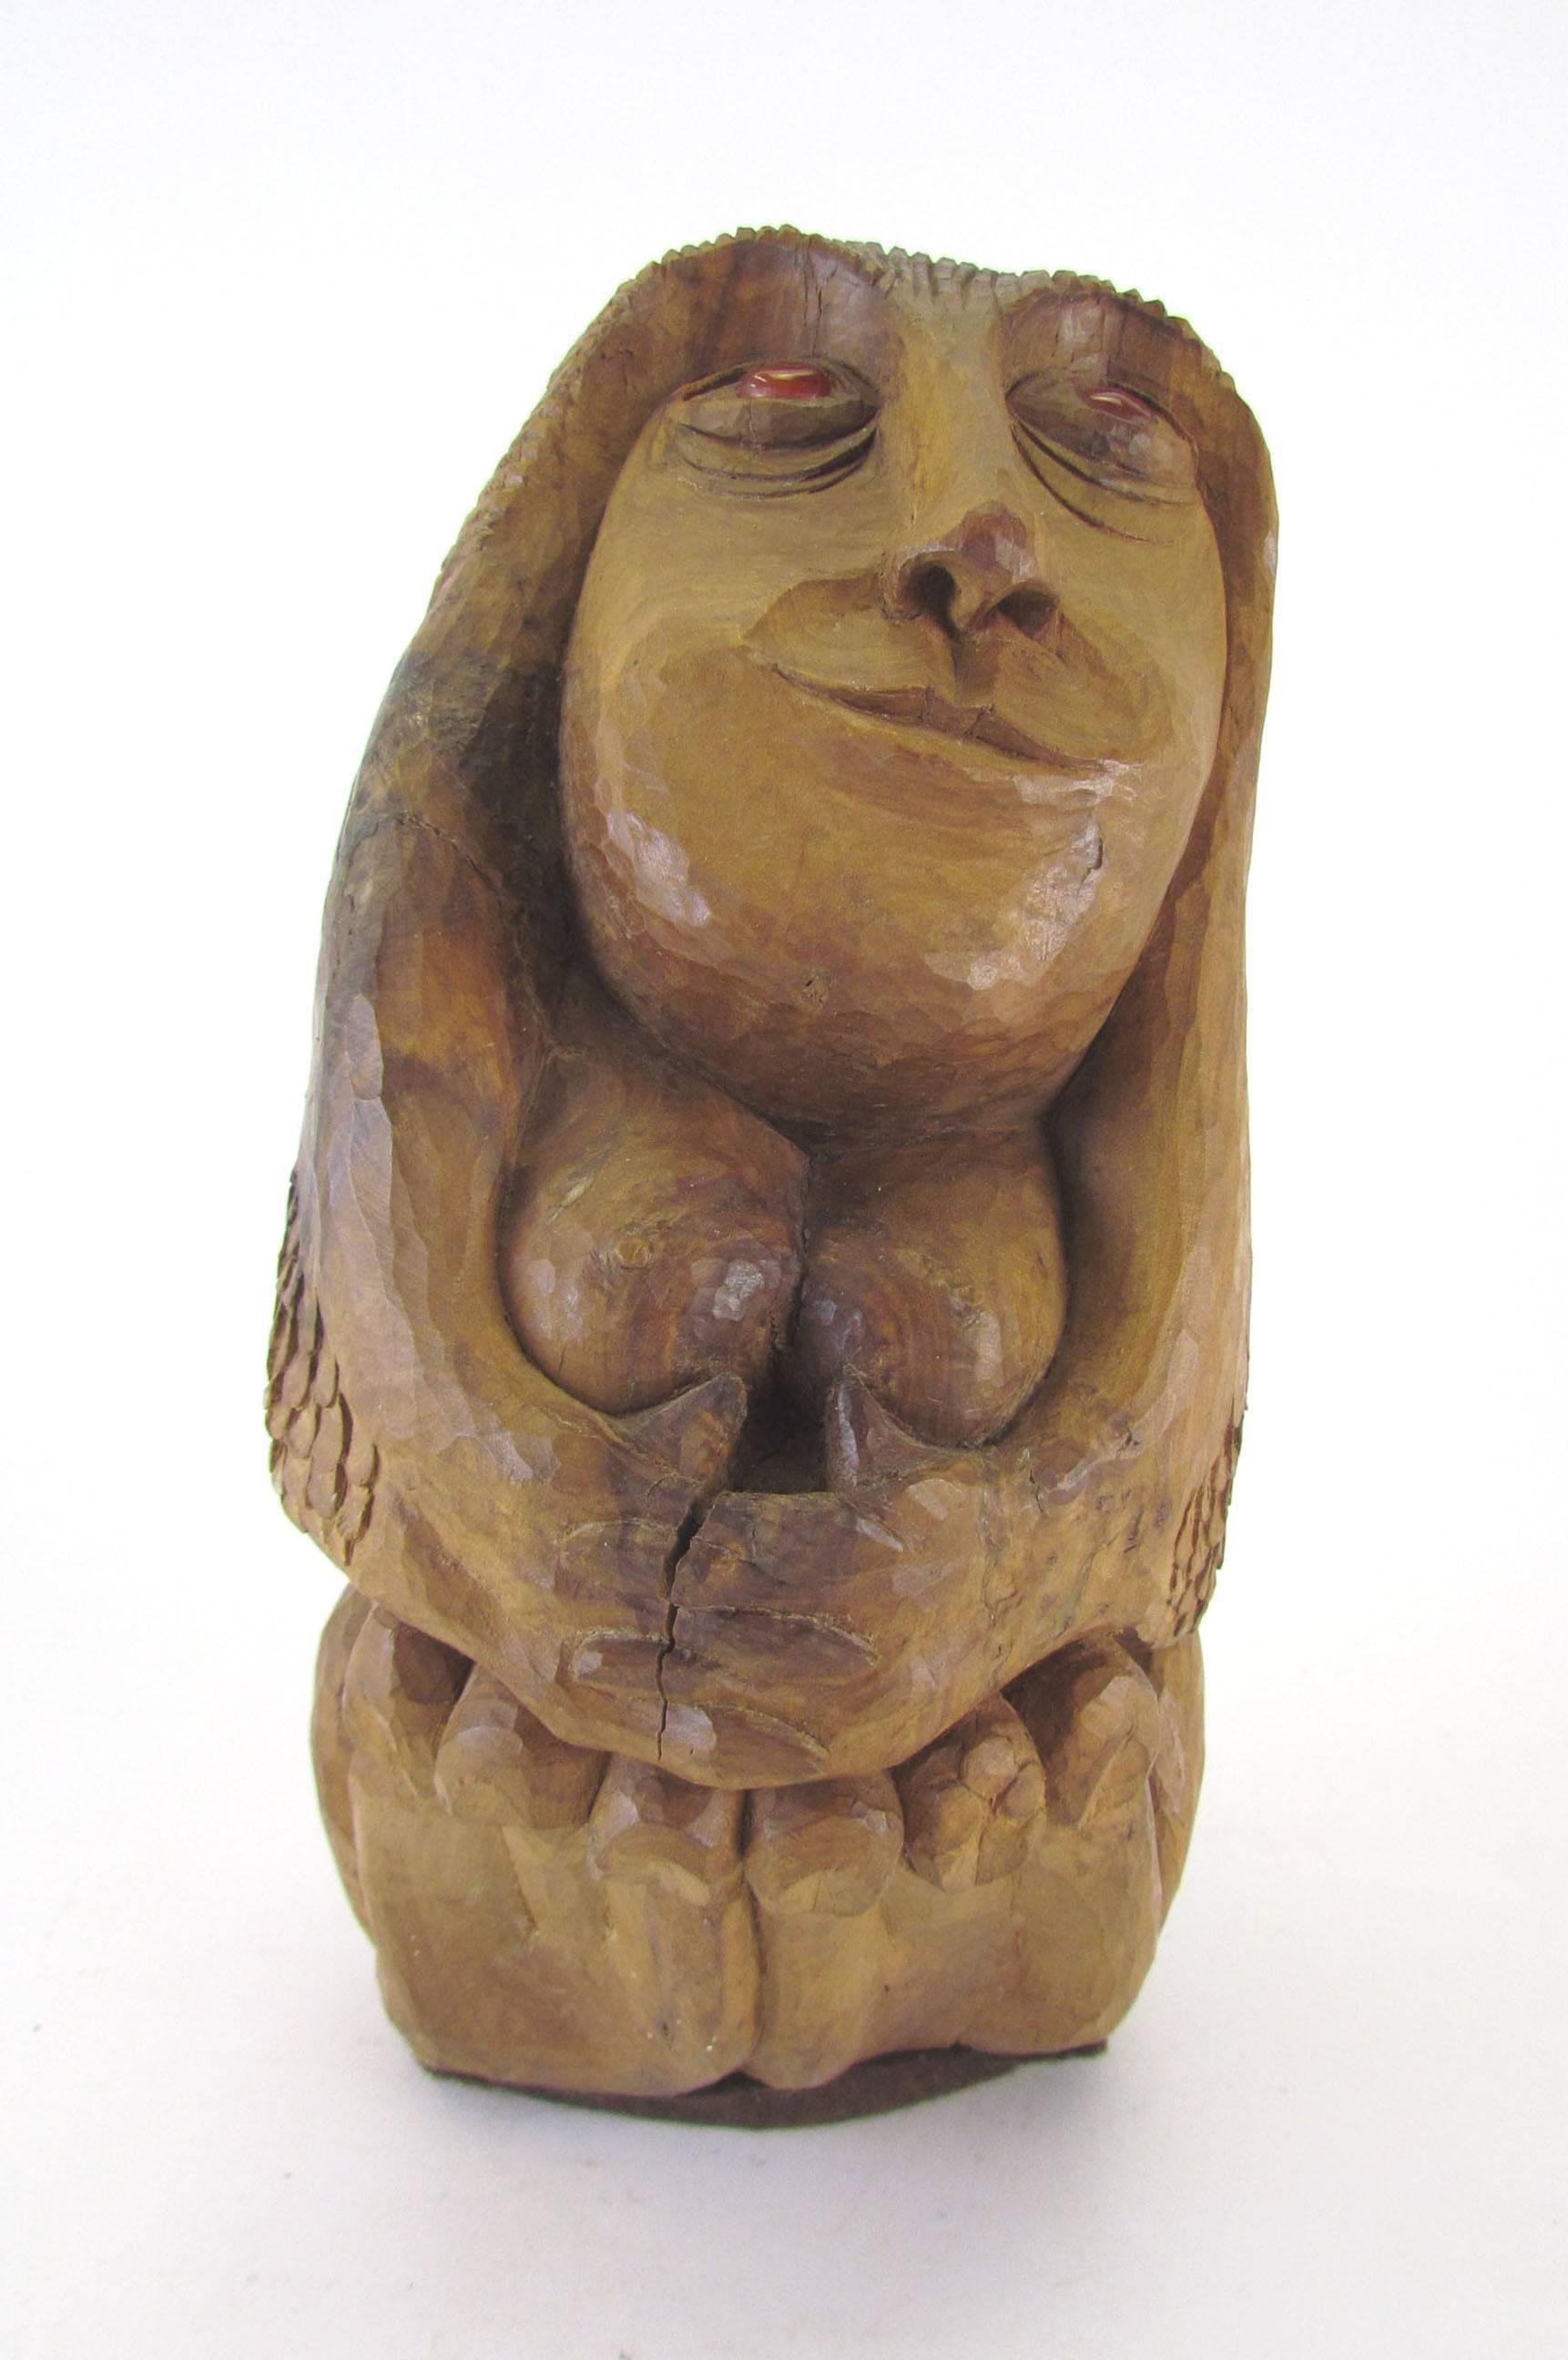 Carved wood sculpture of a female form titled “Apple Mary